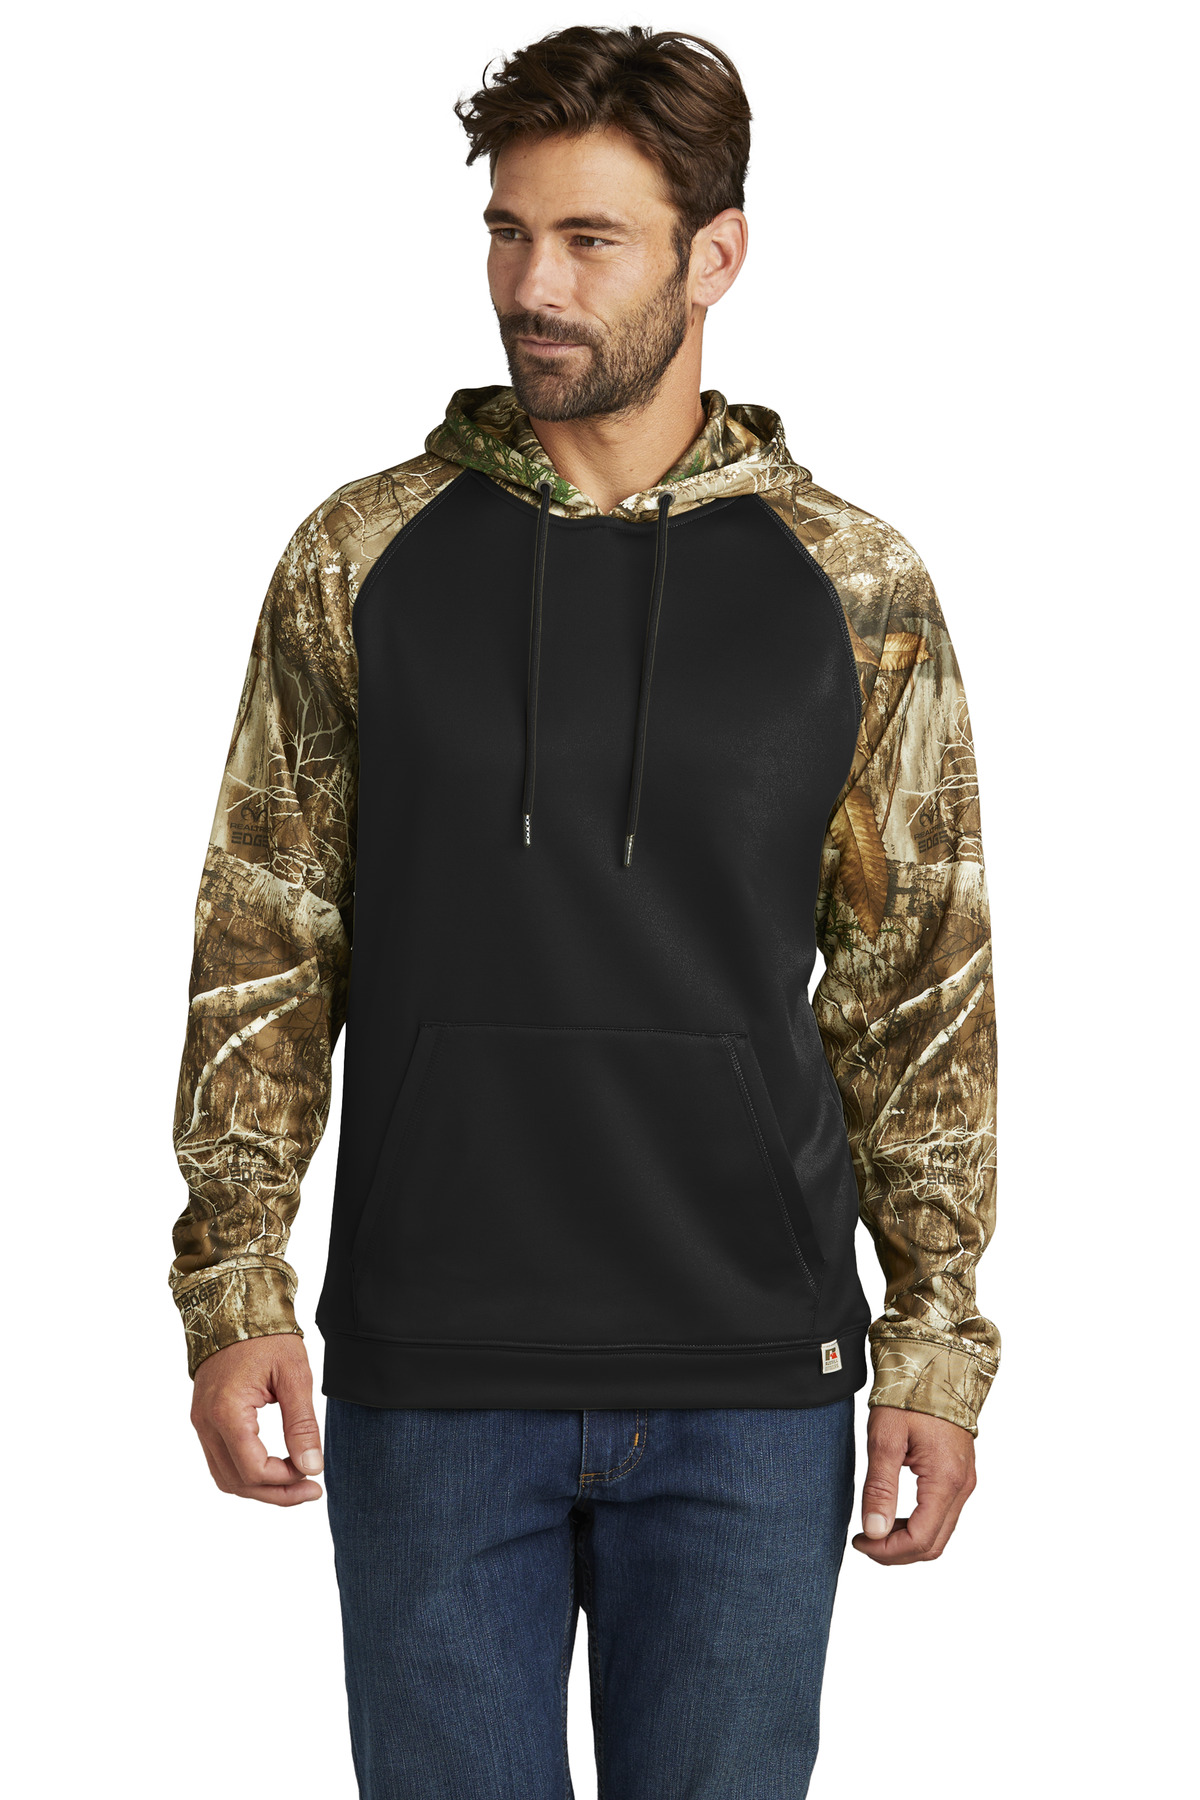 Russell Outdoors Realtree Performance Colorblock Pullover Hoodie RU451